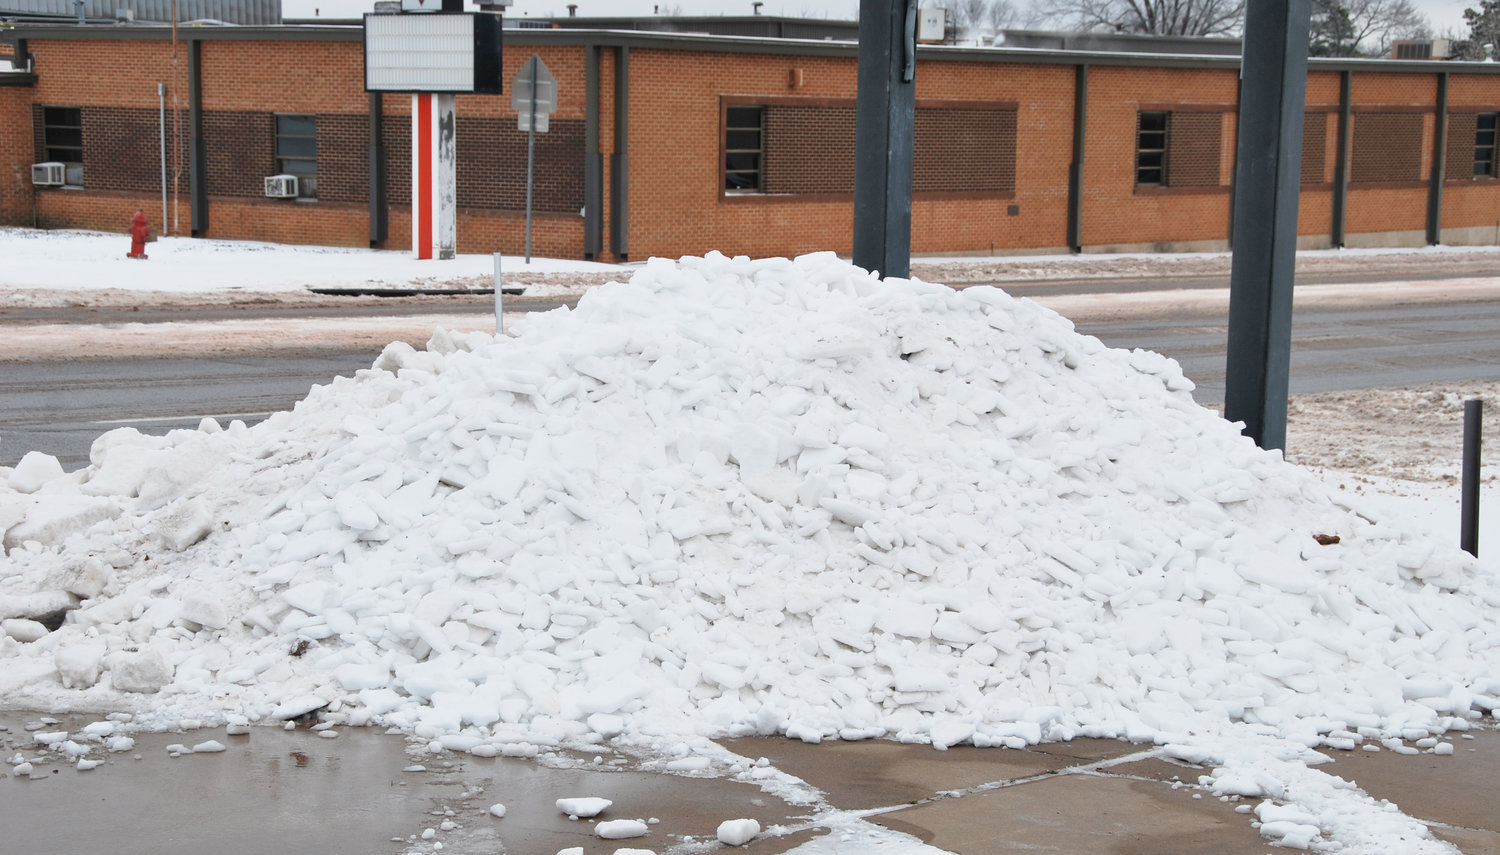 After the concrete was cleared off at Criswell’s Texaco the remains made a giant pile of ice that will be around for awhile.